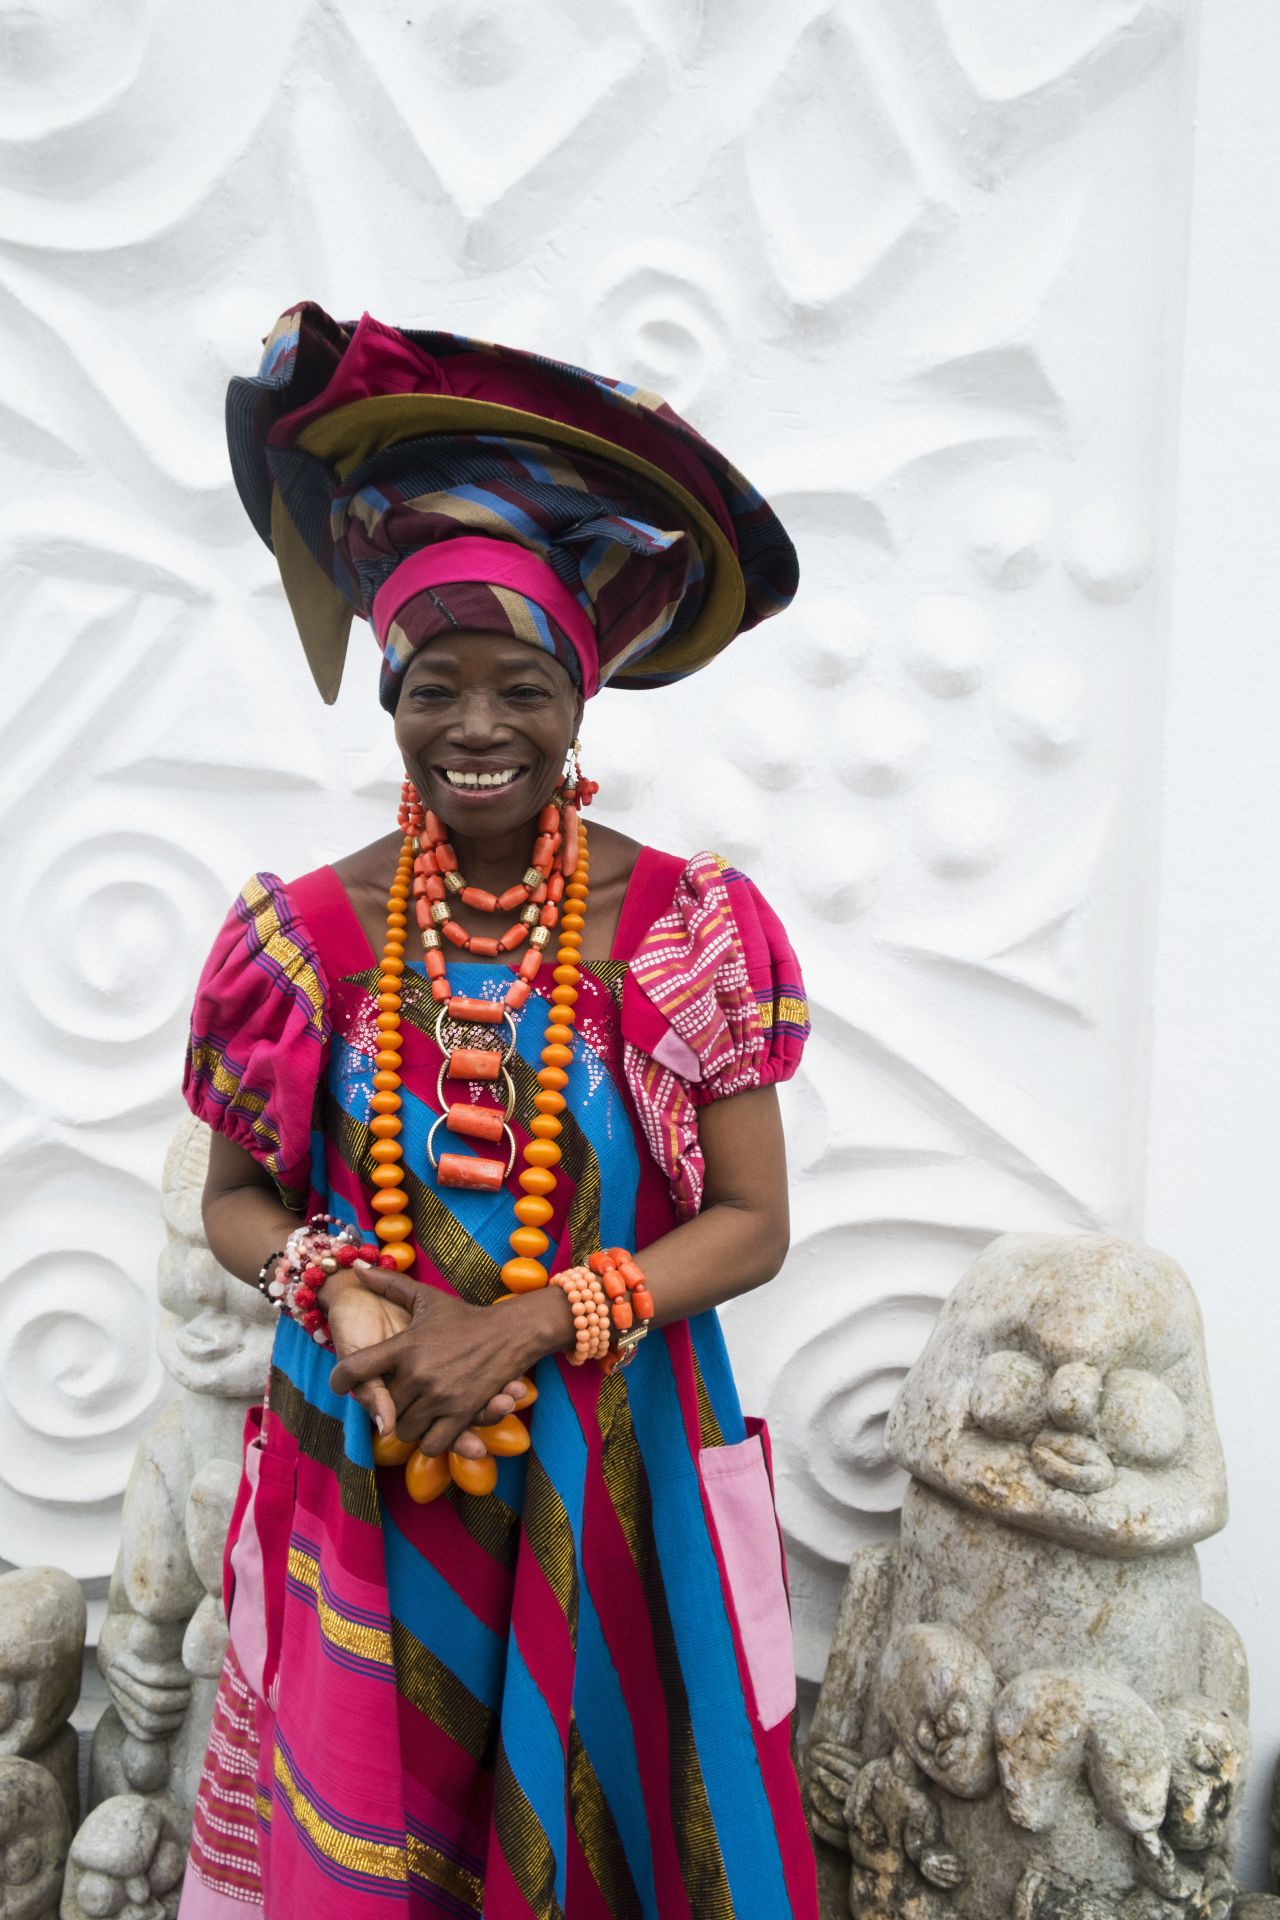  Africa's most populous city is known for its flamboyancy. "Wallflowers need not apply", writes Helen Jennings, journalist and former editor of African fashion magazine Arise. Women mix African and European styles by wearing tailored dresses with the gele, a traditional African head wrap. <br />Pictured: Lagos, Nigeria - Nike Davis Okundaye, Nike Art Centres